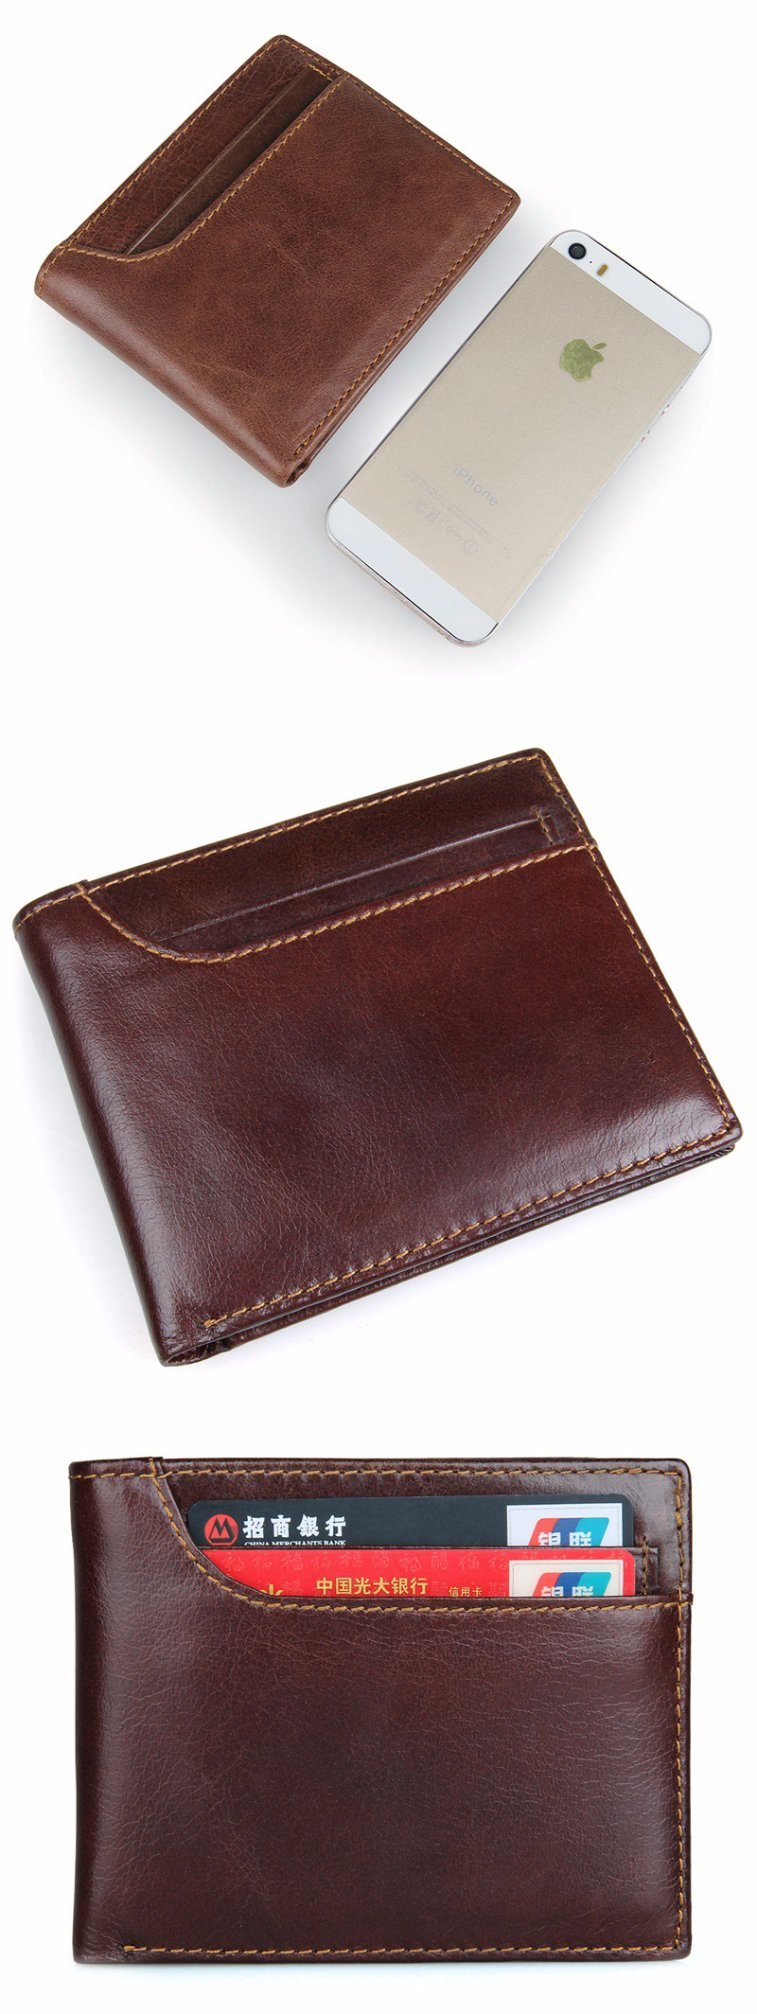 Wholesale Price Good Quality Retro Style RFID Brown Leather Men Wallet Credit Card Wallet